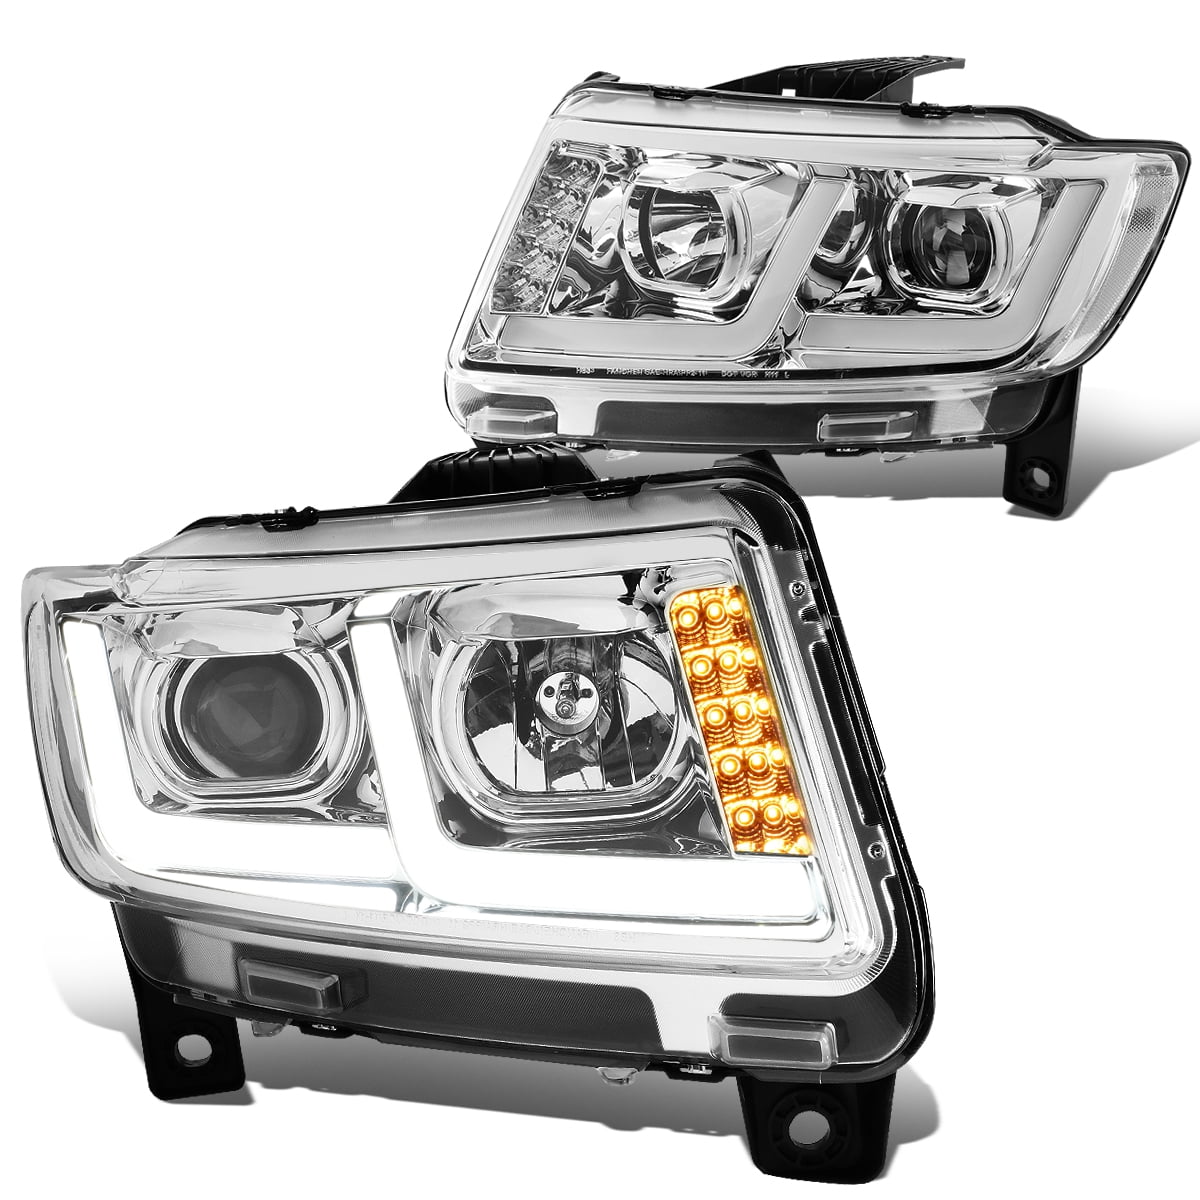 For 11-13 Jeep Grand Cherokee Halogen Headlight/Lamps Clear Side Corner Chrome